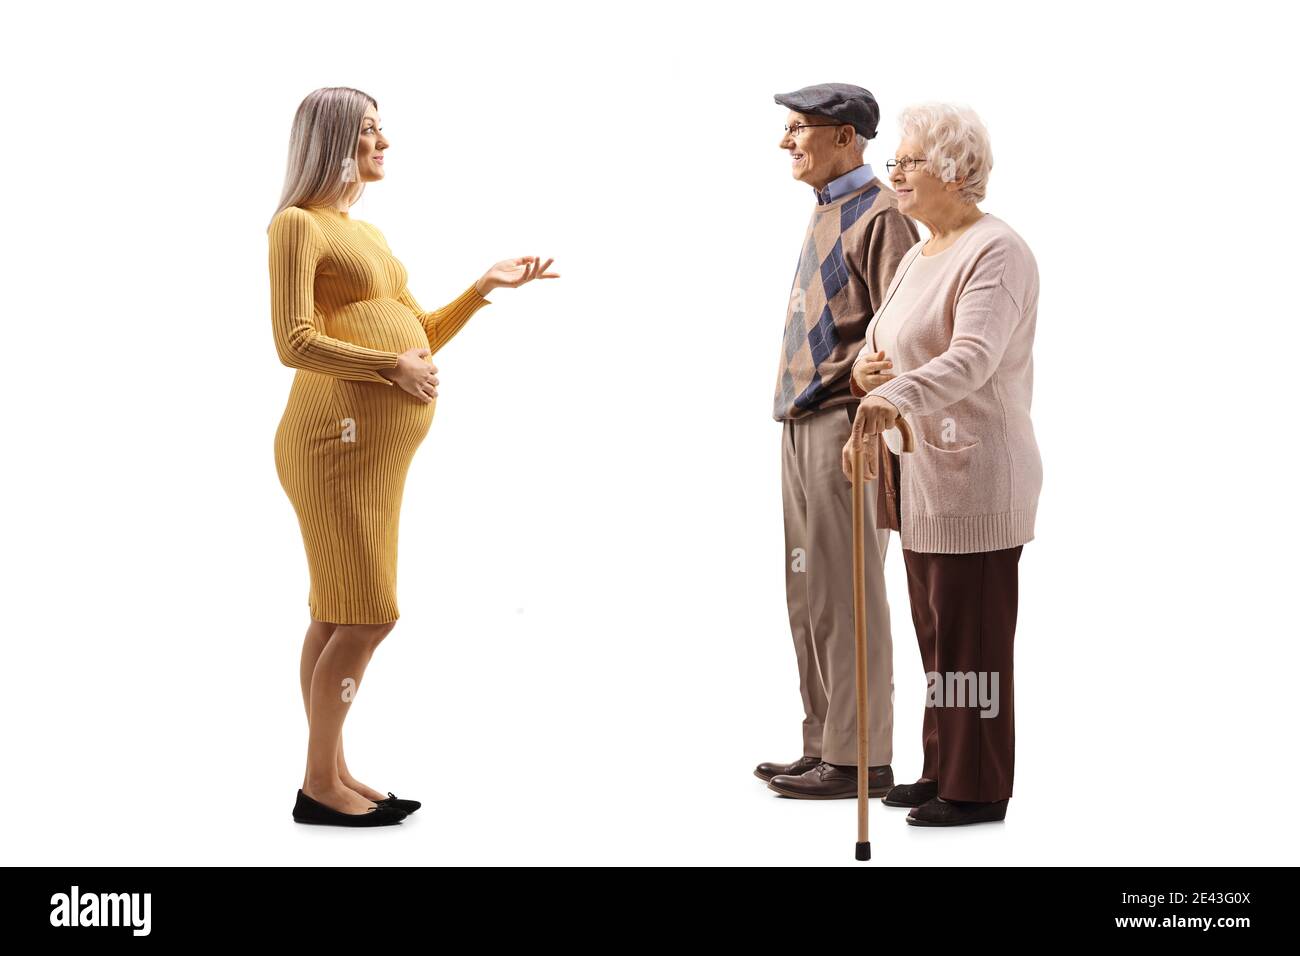 Full length profile shot of a pregnant woman talking to an elderly man and woman isolated on white background Stock Photo